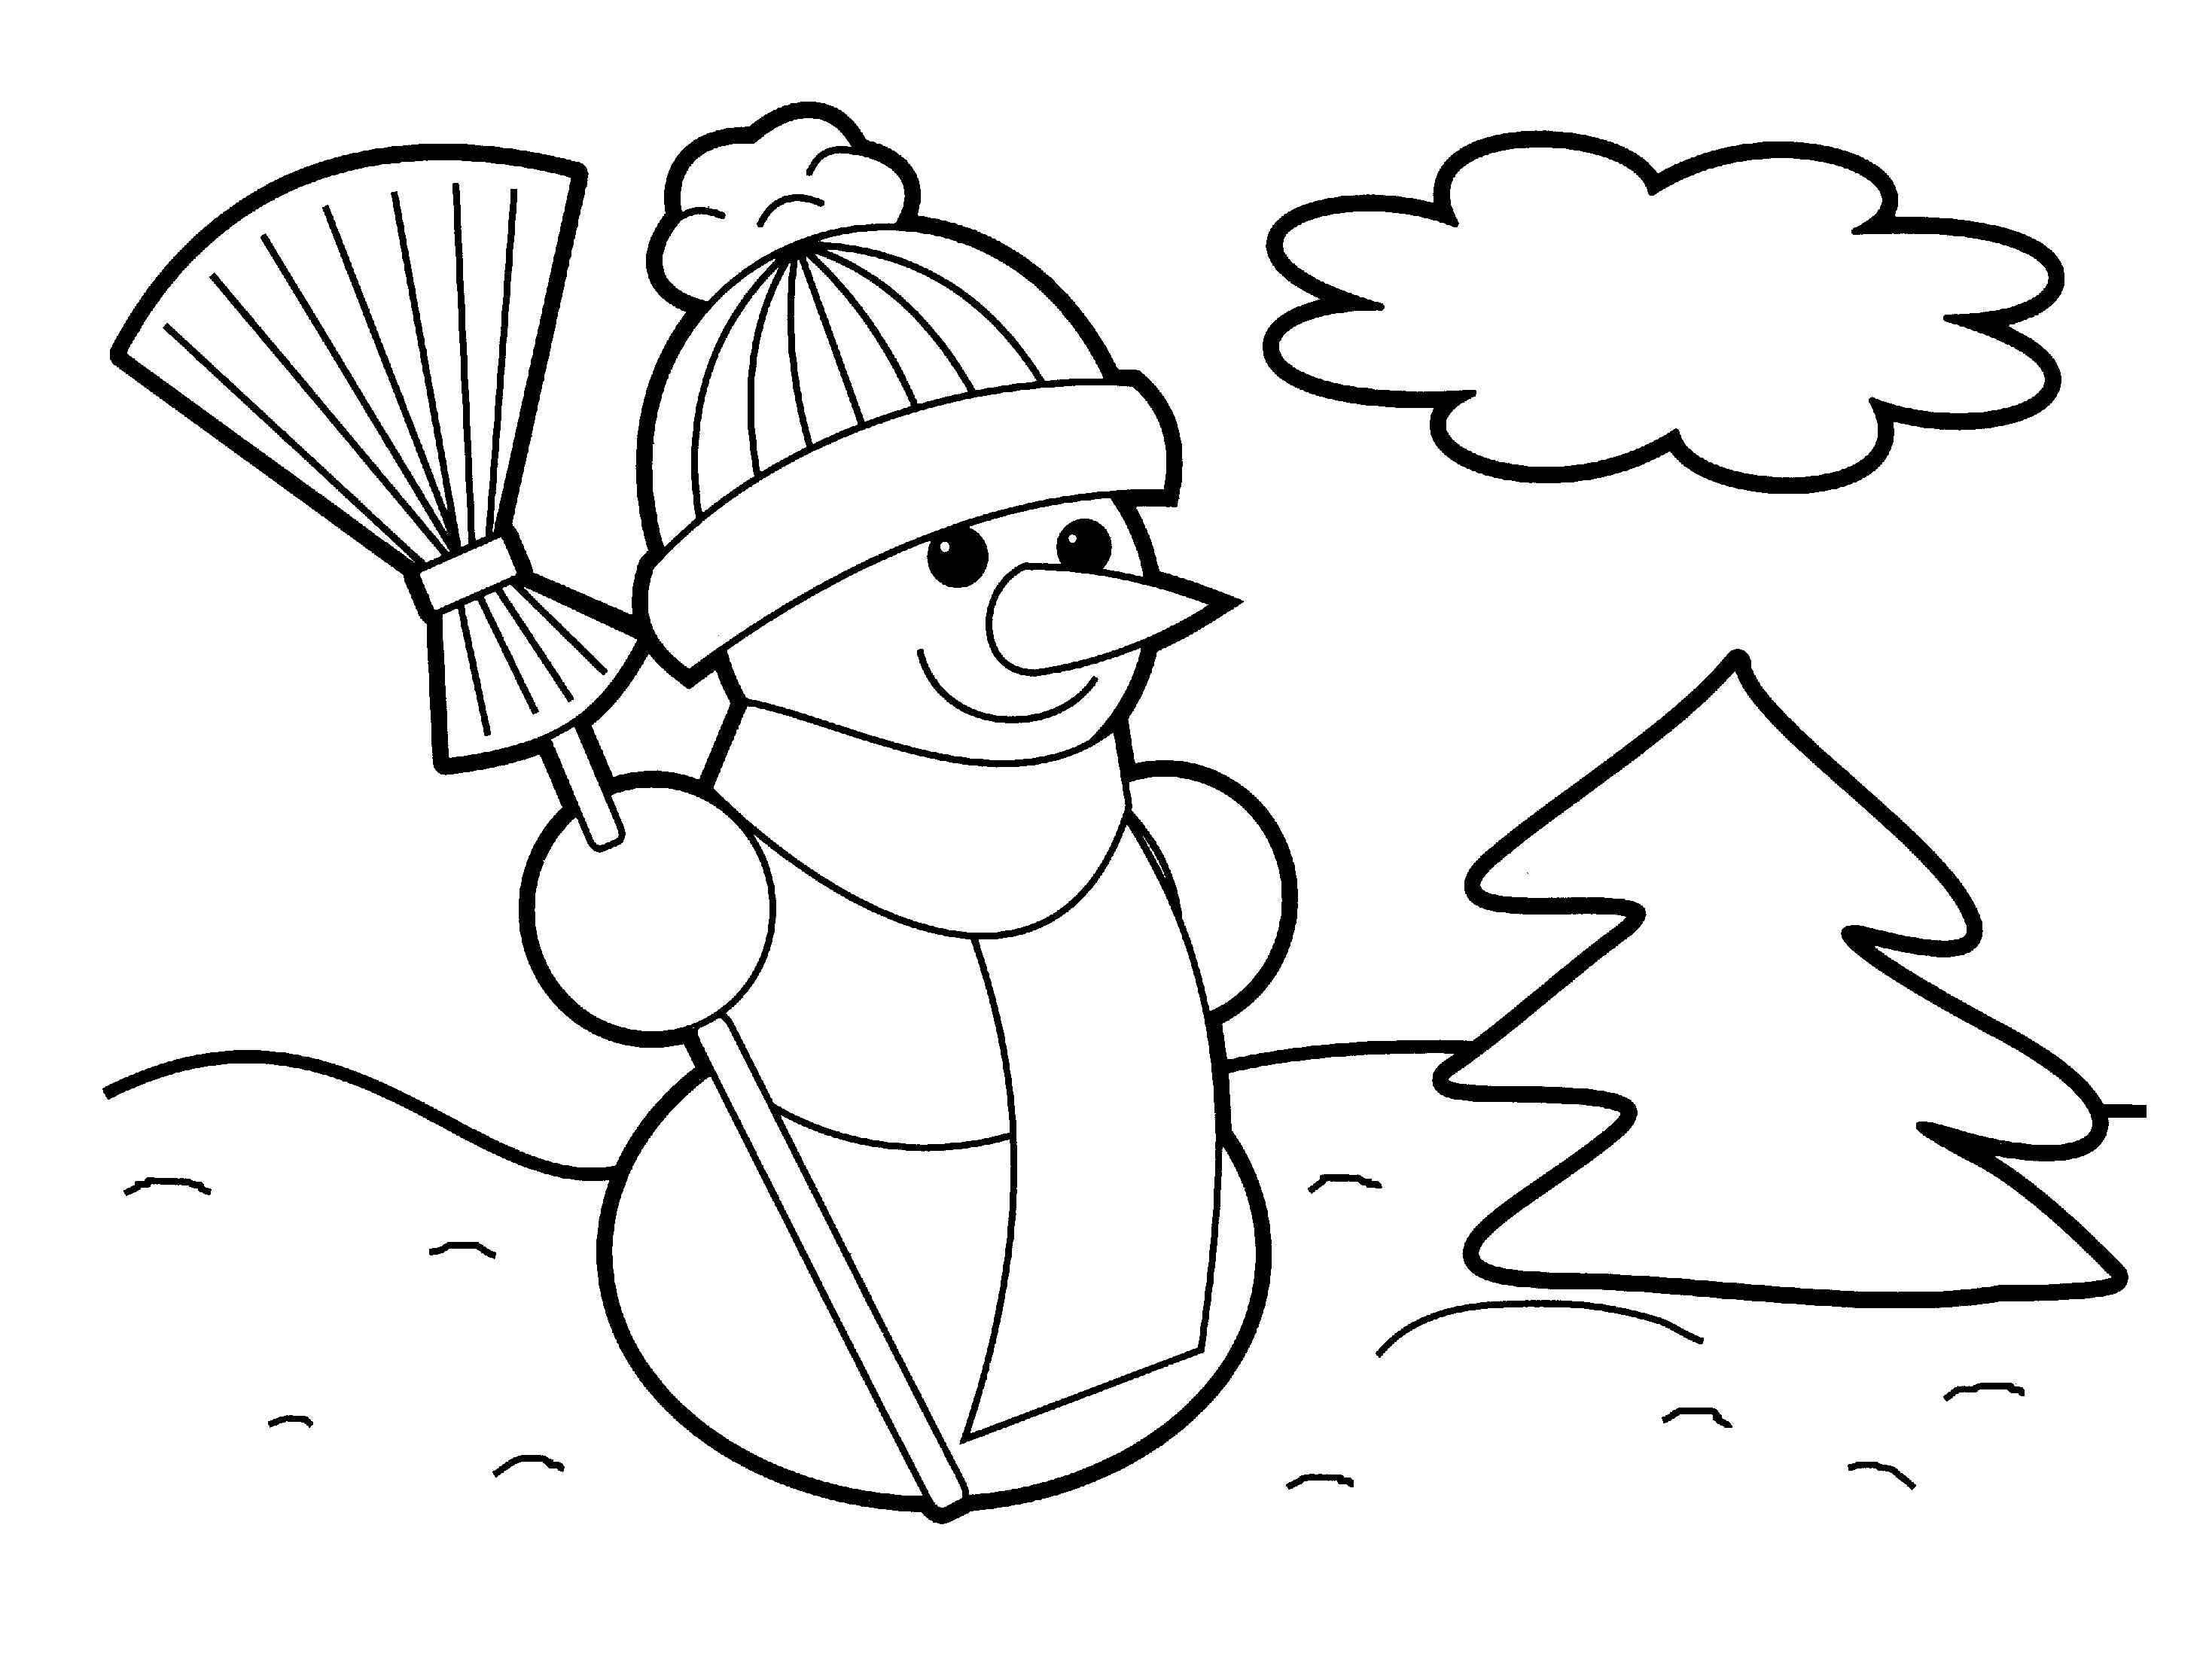 Free Christmas Clip Art Coloring Pages Download Free Christmas Clip Art Coloring Pages Png 